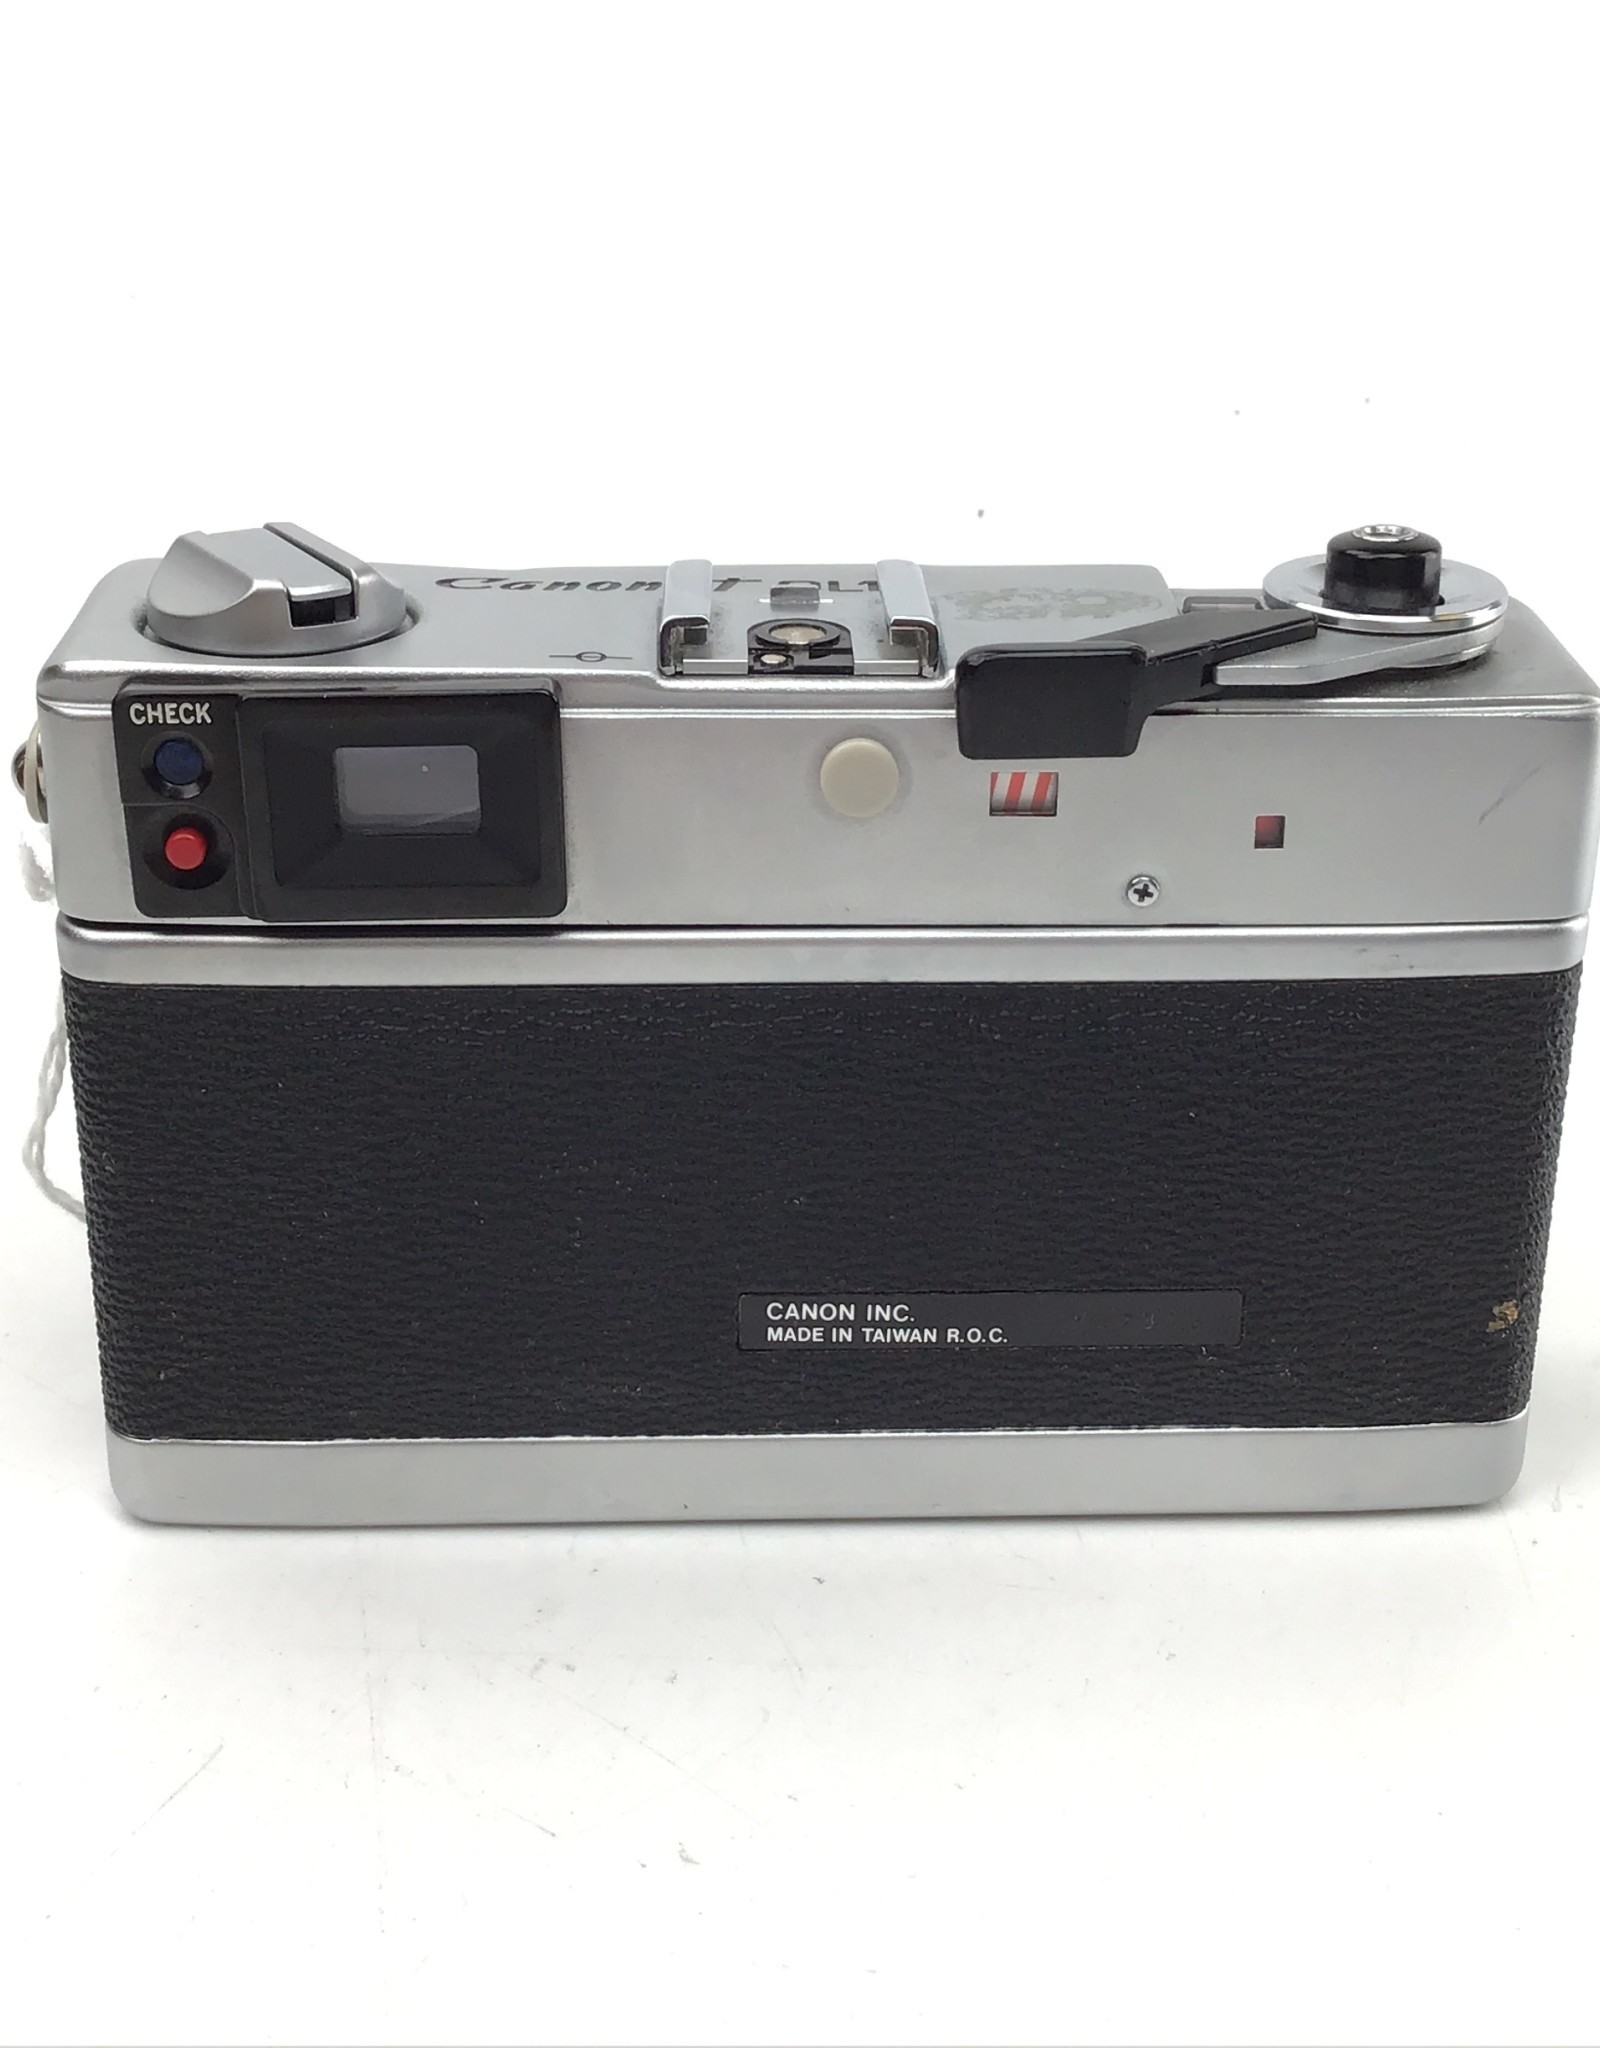 CANON Canon QL-17 G-III Camera Meter Off 1 Stop Used Fair